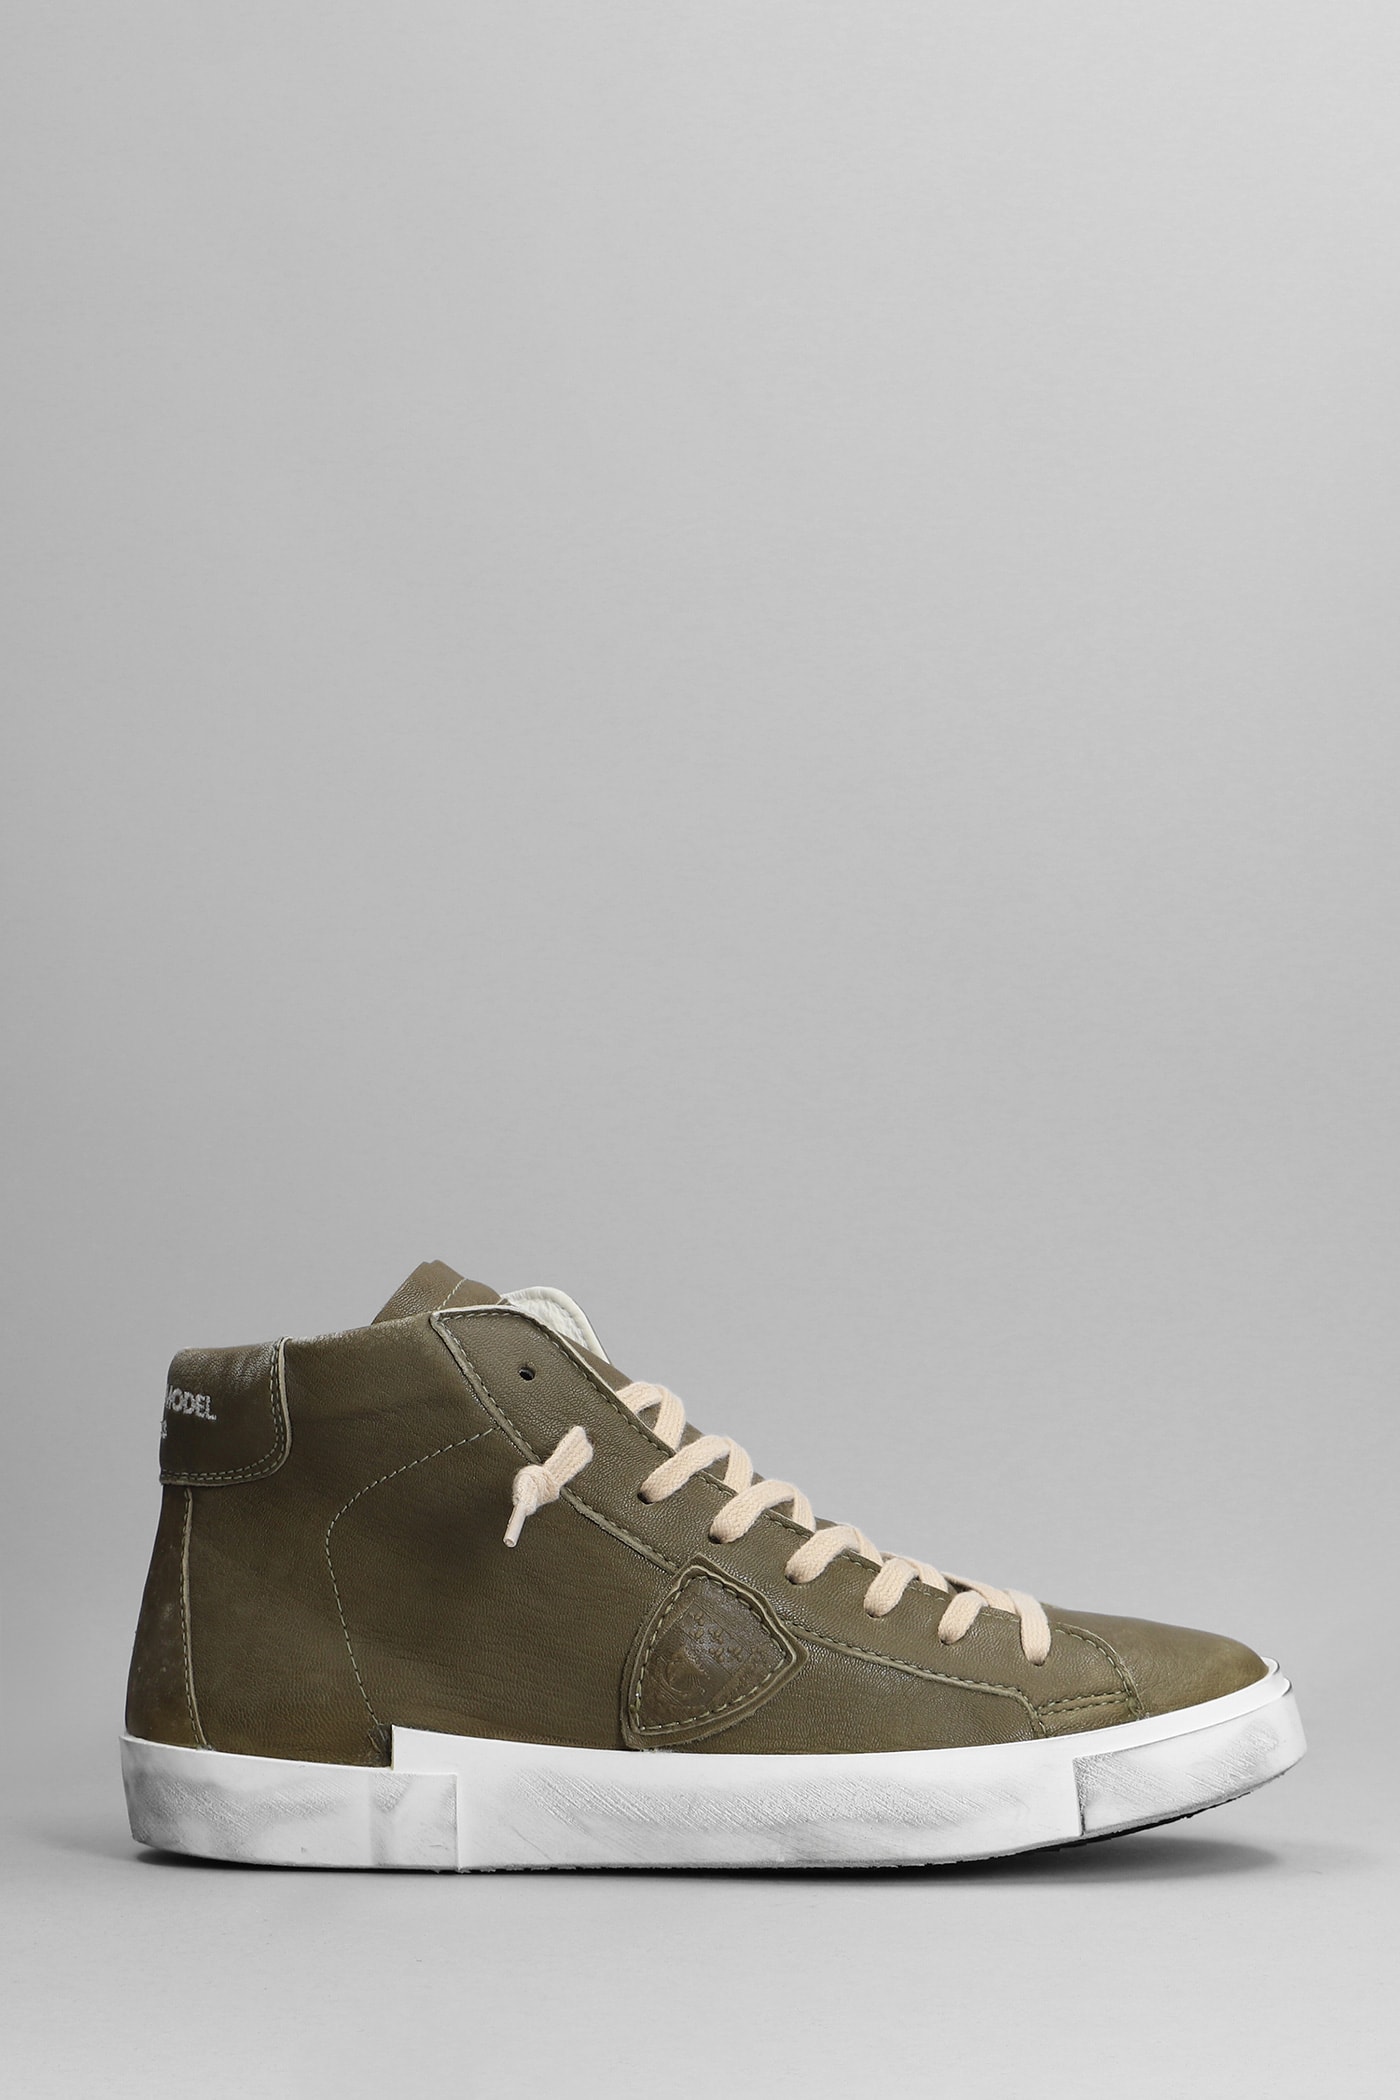 Philippe Model Prsx High Sneakers In Green Leather